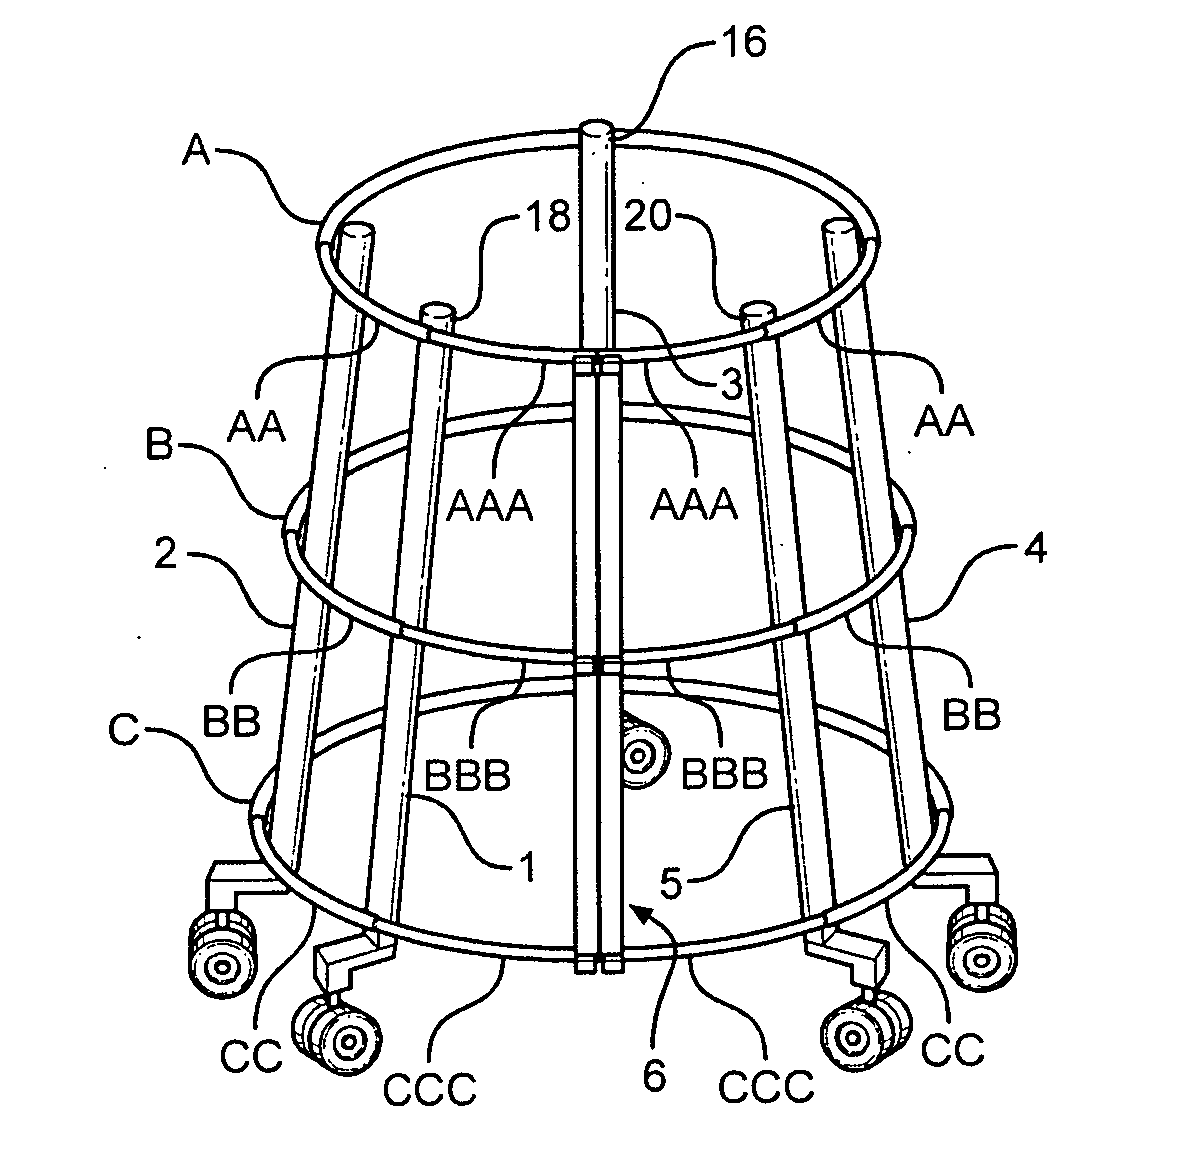 Therapeutic mobility assistive device